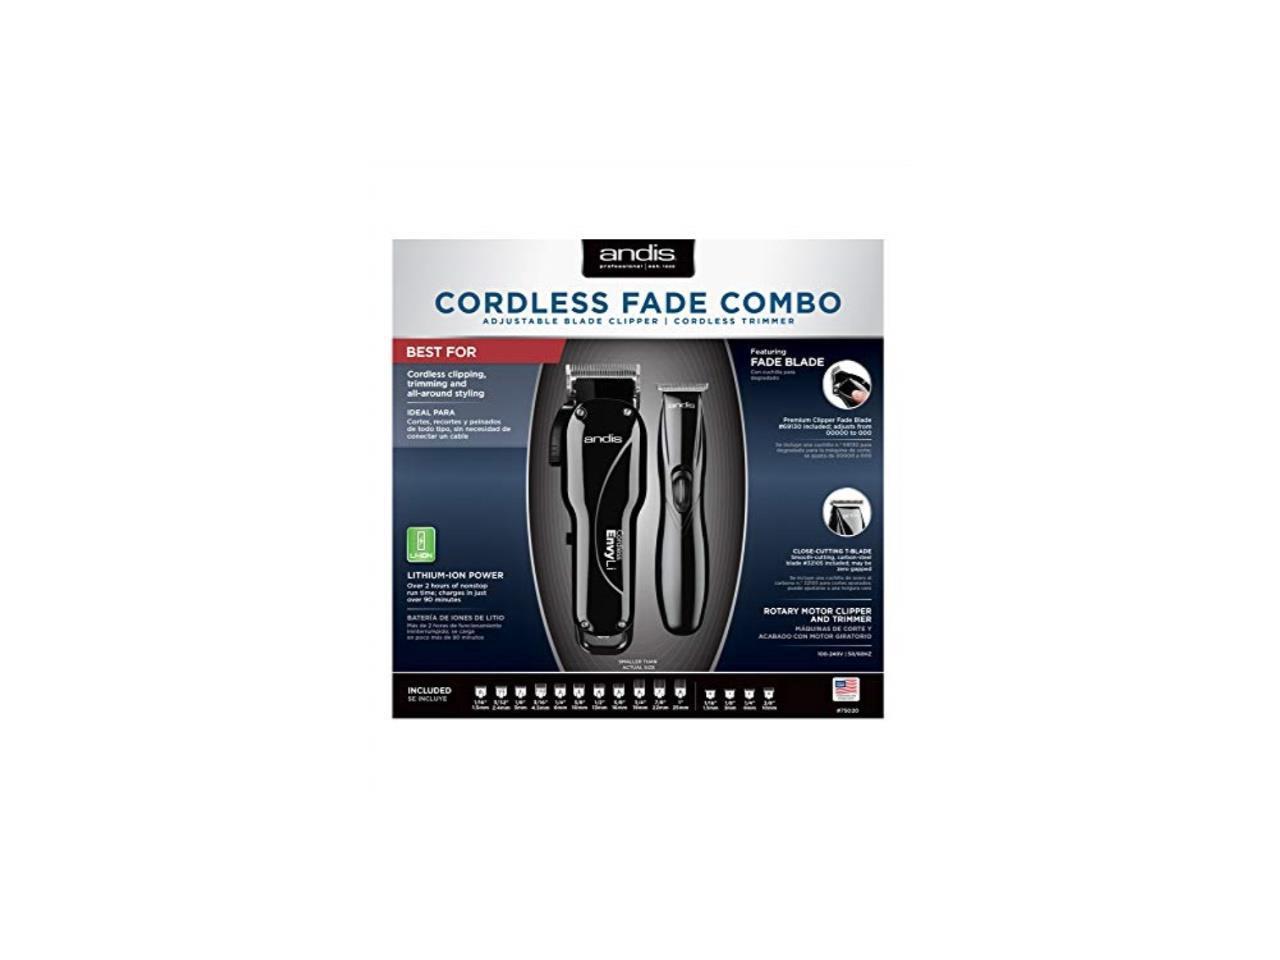 andis 75020 cordless fade combo